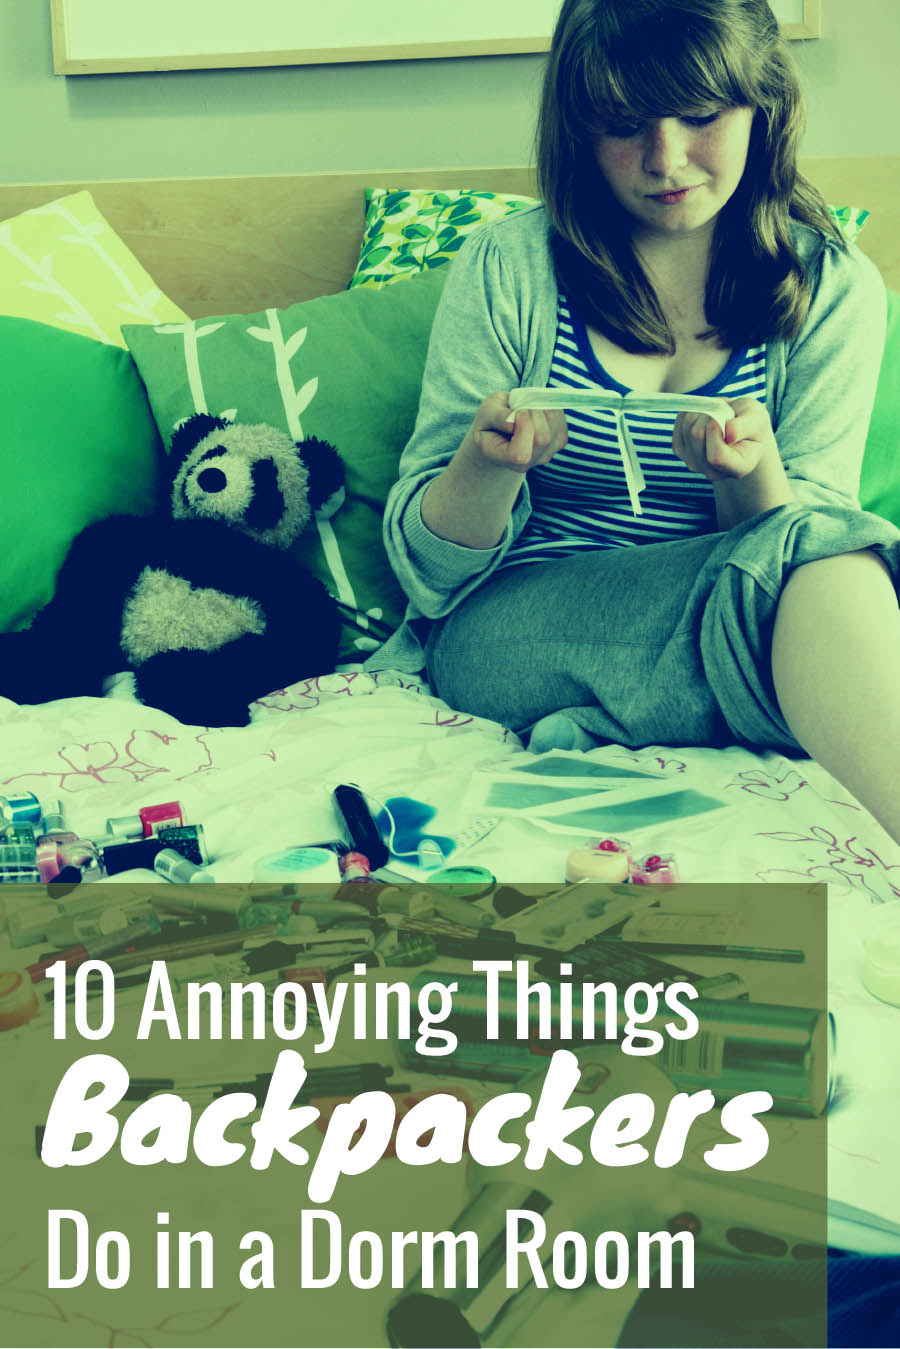 10 Annoying Things Backpackers Do in a Dorm Room